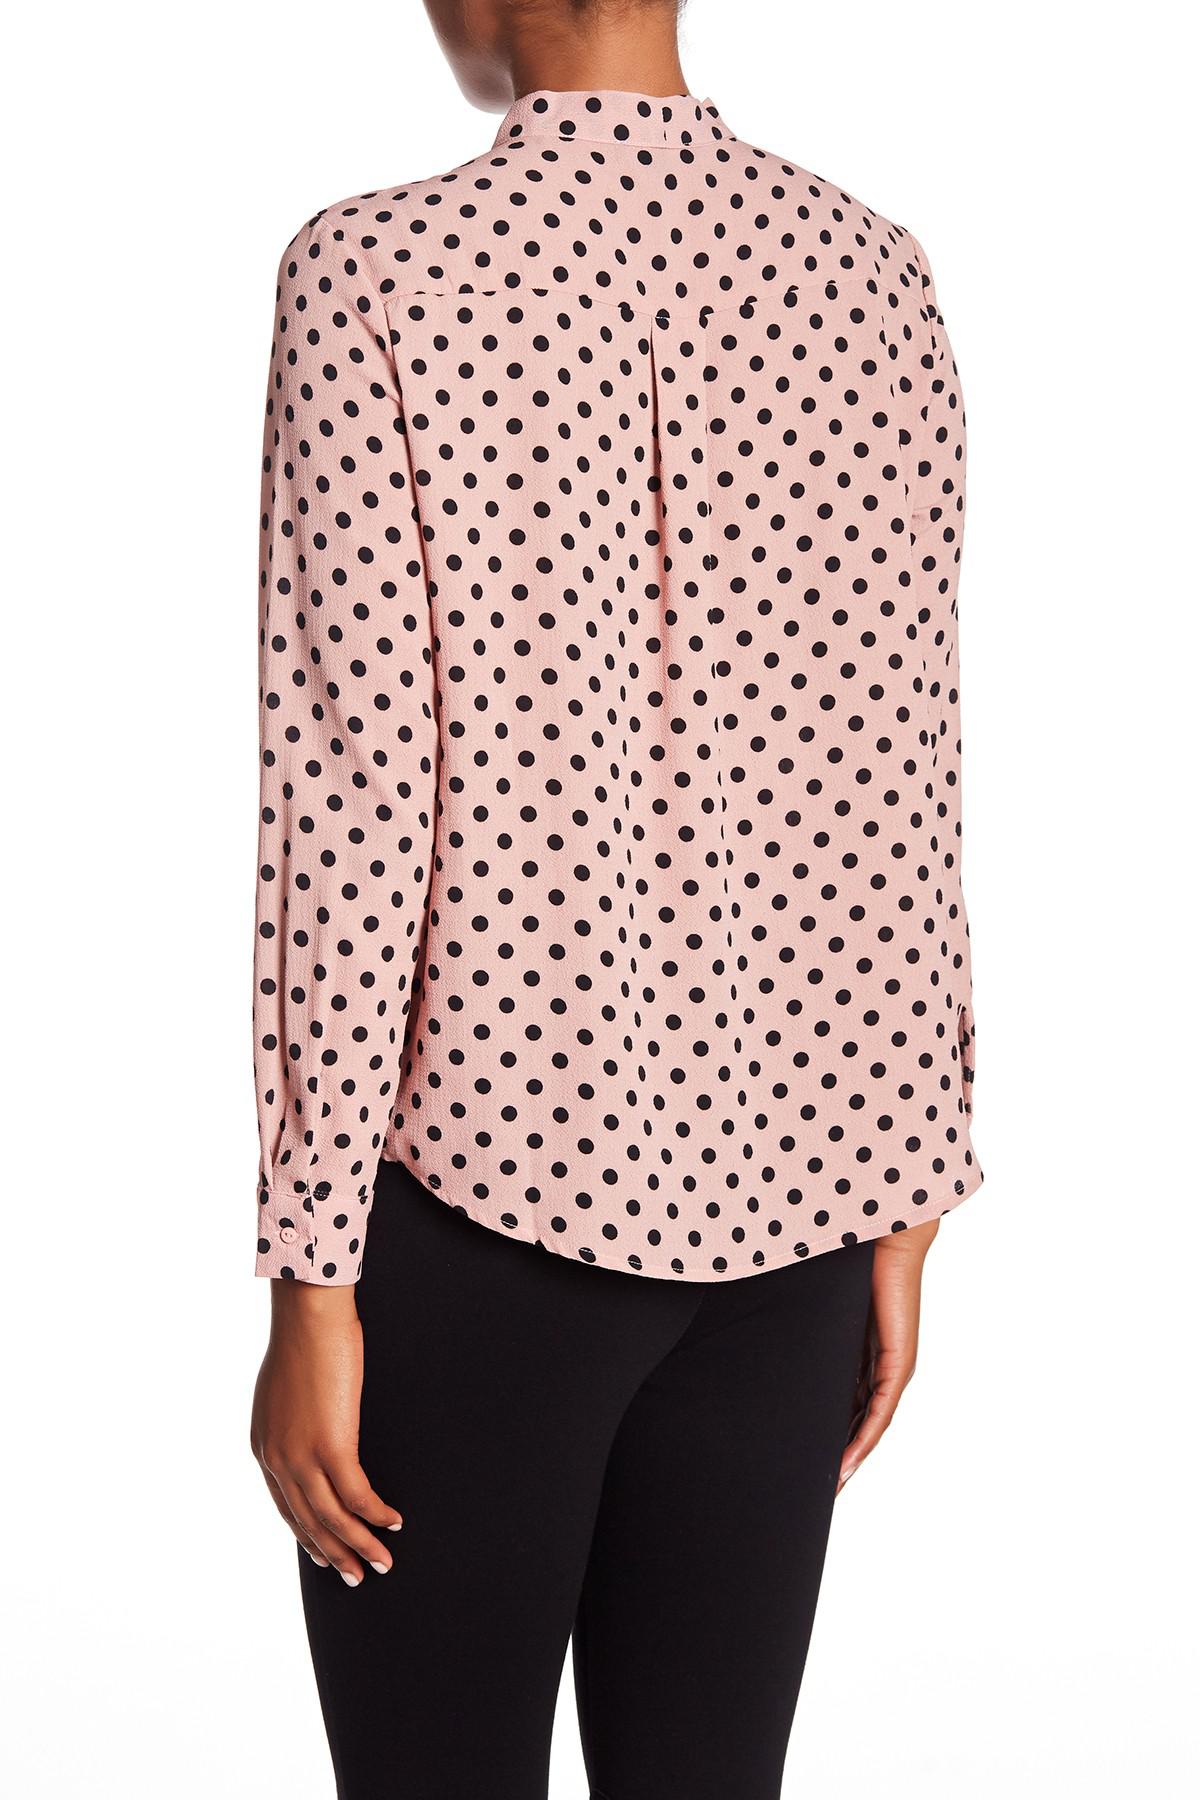 Adrianna Papell Synthetic Long Sleeve Tie Neck Blouse | Lyst